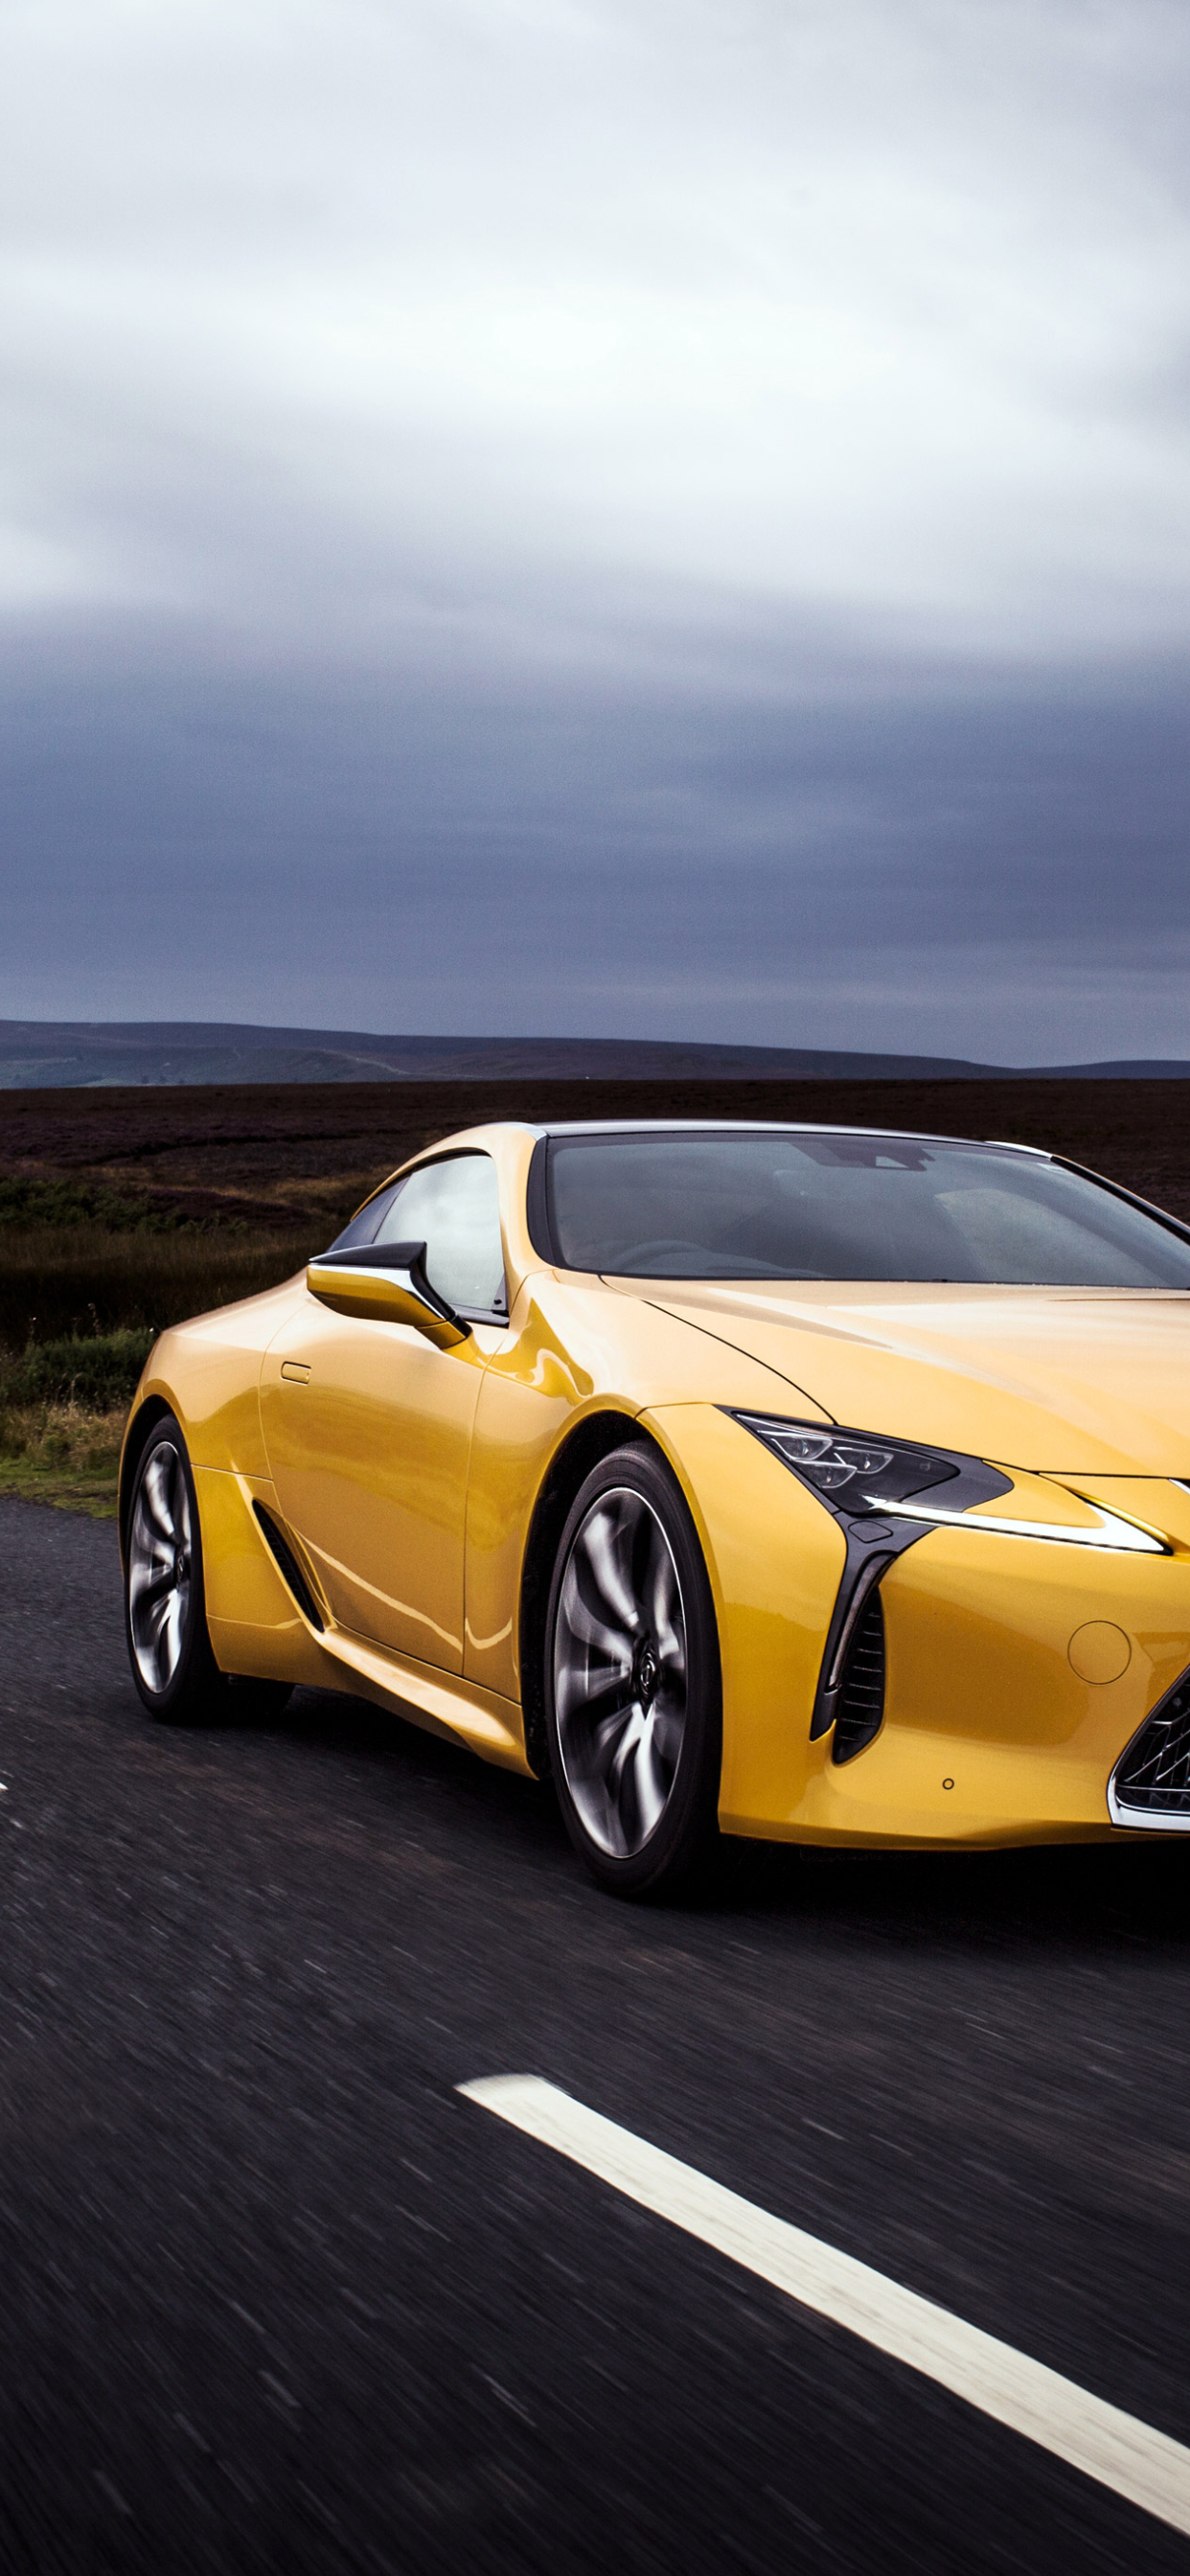 1242x26 17 Lexus Lc 500 Iphone Xs Max Wallpaper Hd Cars 4k Wallpapers Images Photos And Background